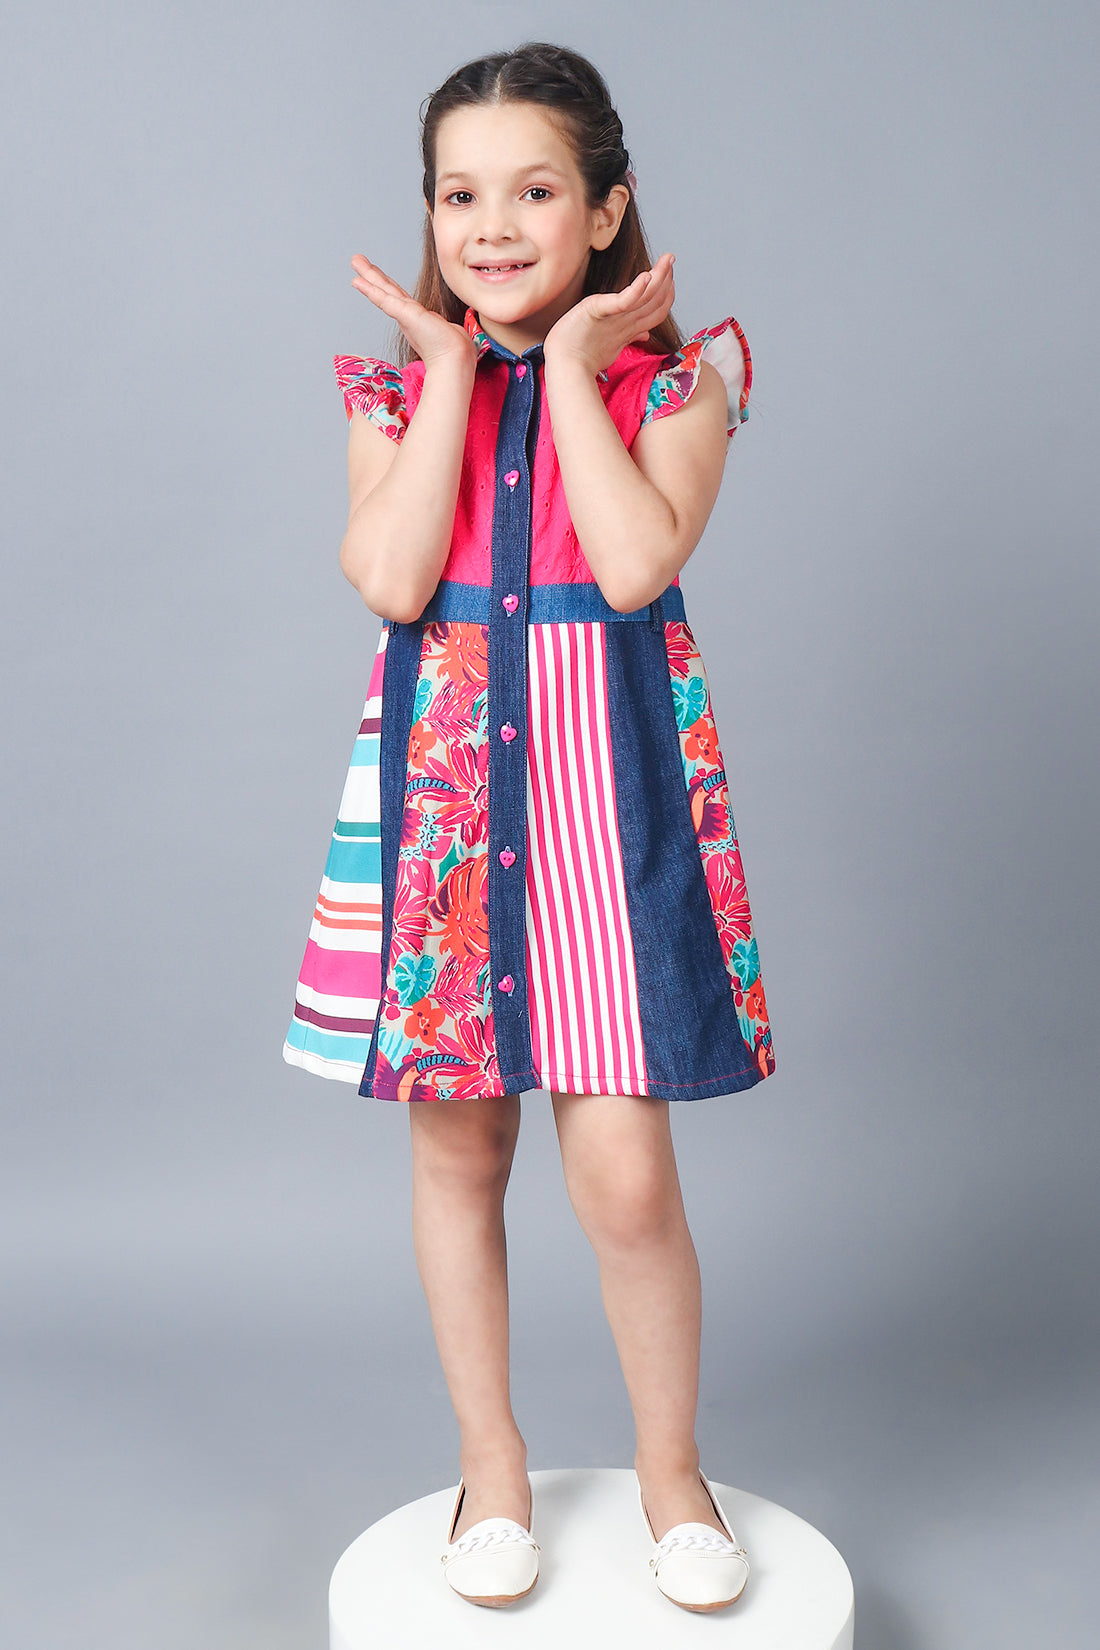 One Friday Kids Girls Prints and Patterns Pink Dress